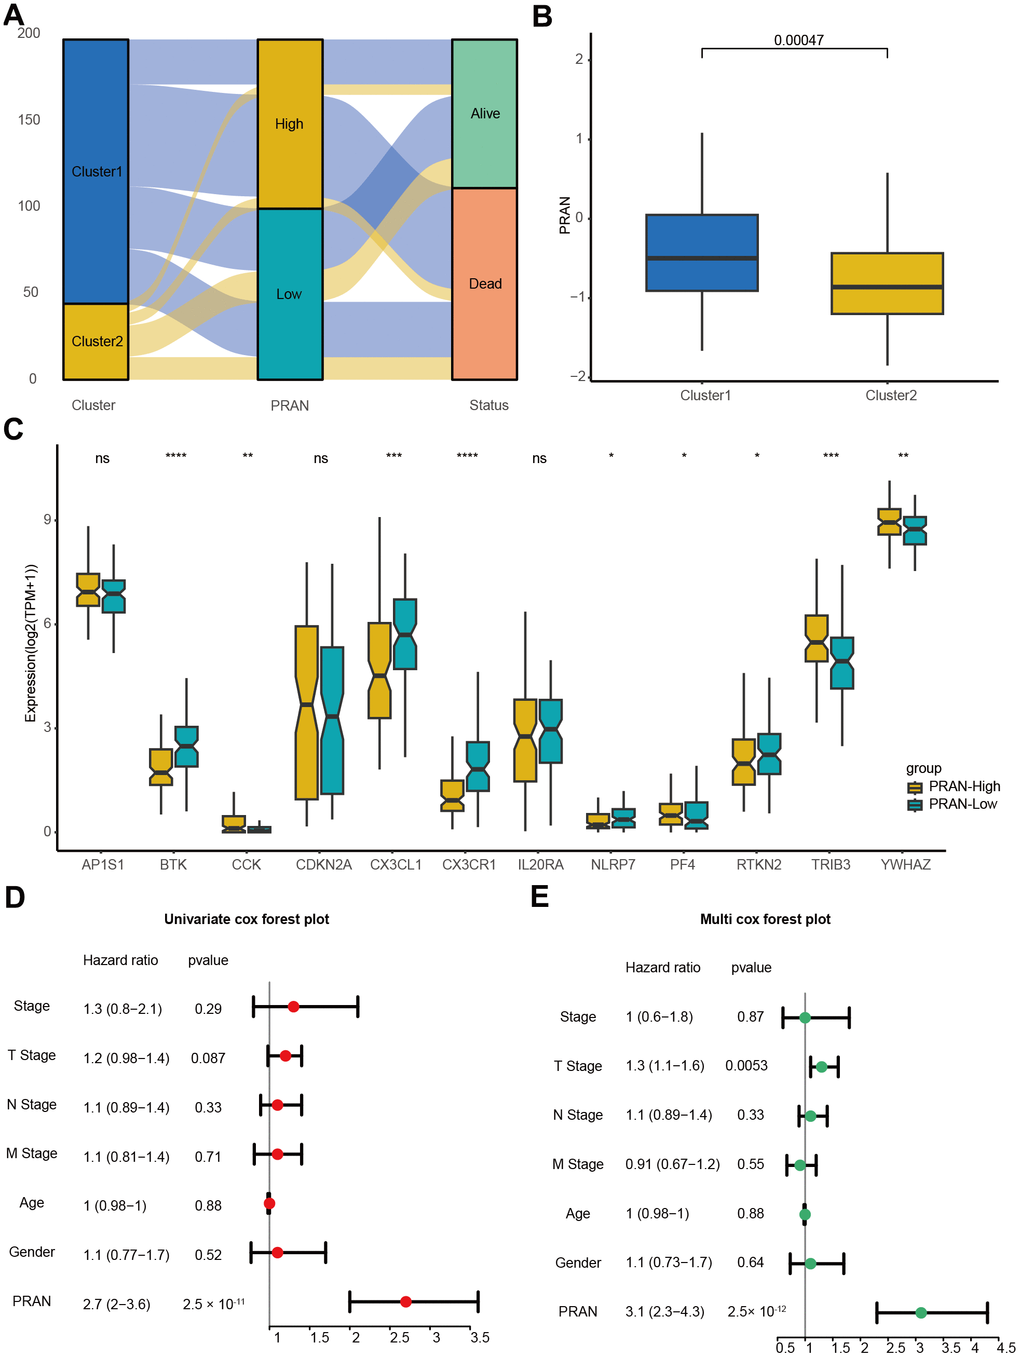 The correlation validation of PRAN risk model in TCGA-Advanced NSCLC dataset. (A) The Sankey plot illustrates the distribution of PCD risk groups, PCD clusters, and survival outcomes. (B) Box plots depicting the relationship between PCD clusters and PRAN risk groups. (C) Box plots showing the expression levels of 12 PCD-related prognosis genes between PRAN-High and PRAN-Low groups. (D) Univariate Cox regression analysis of PCD risk scores and clinical variables. (E) Multivariate Cox regression analysis of PCD risk scores and clinical variables. P-value: ns >=0.05; * 